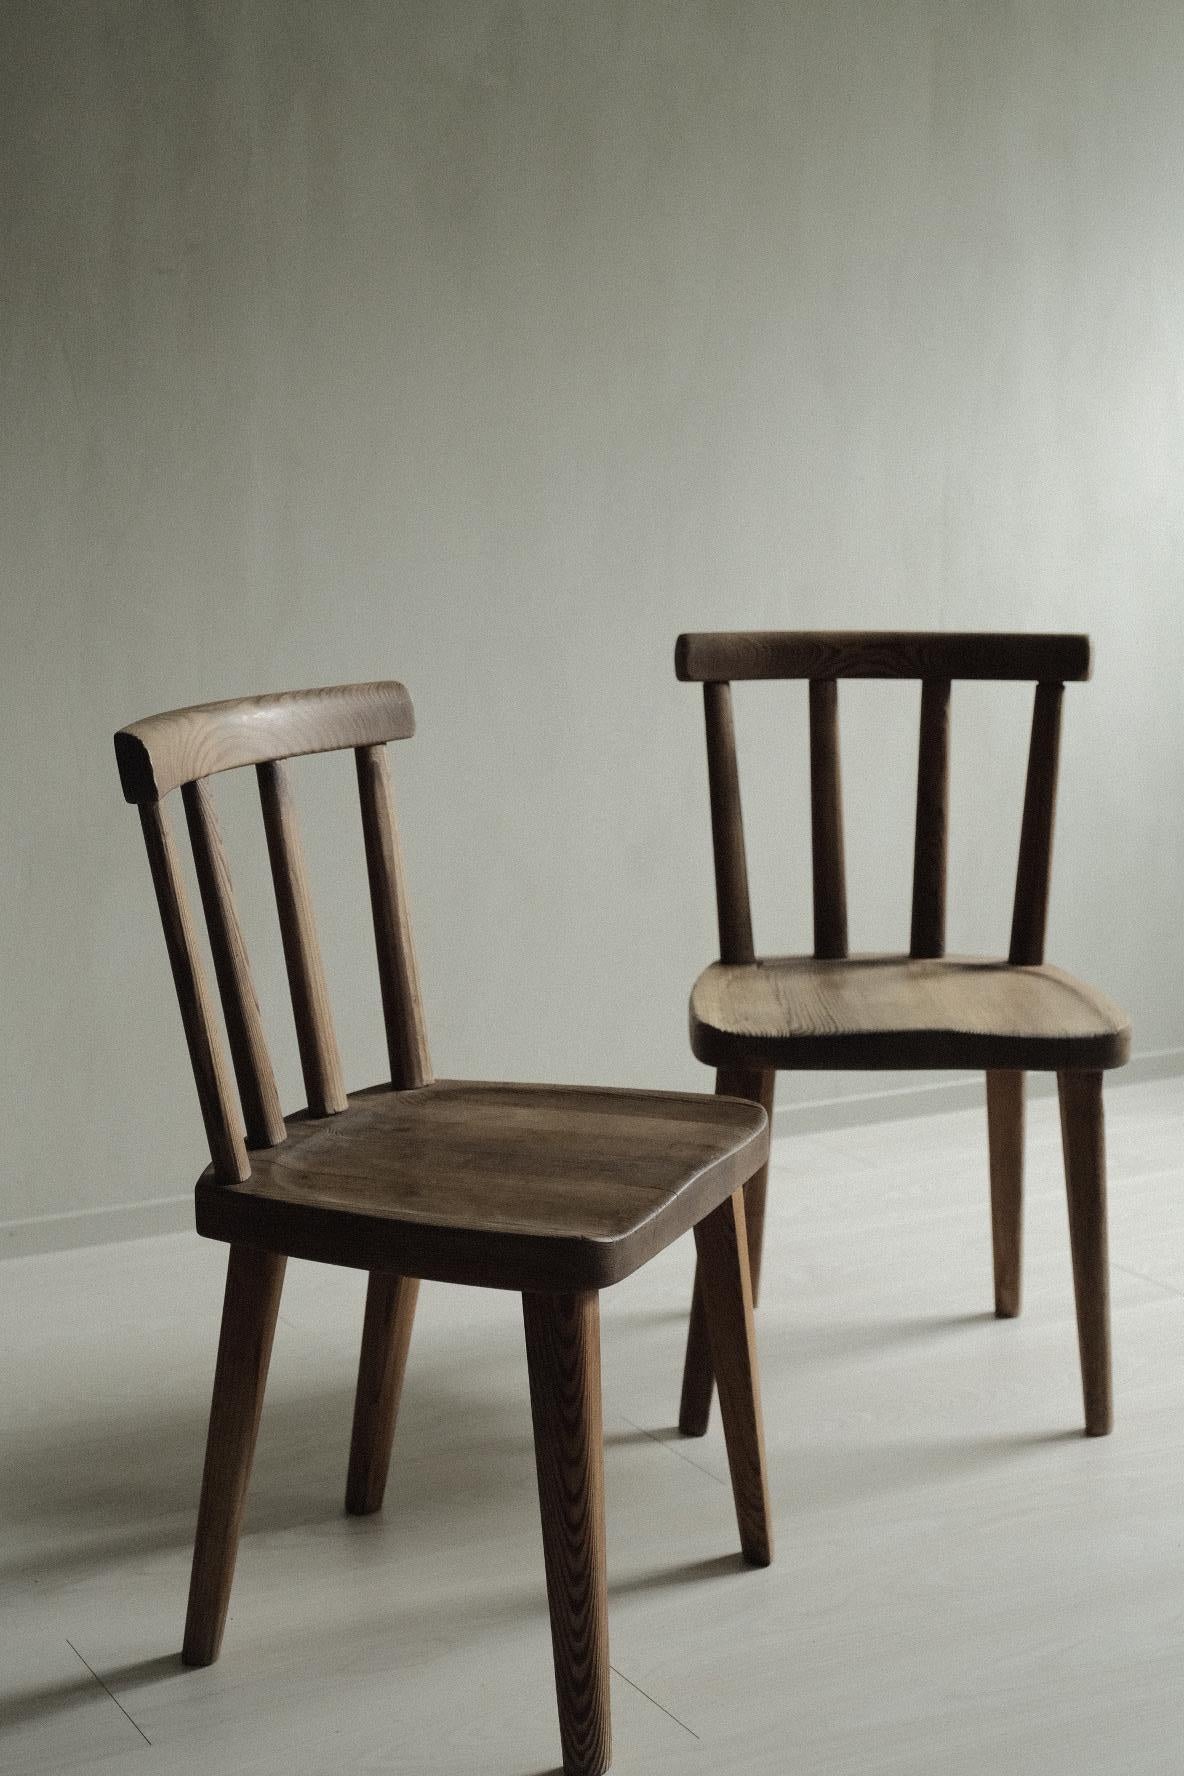 A pair of beautiful patinated Utö chairs by Swedish designer Axel Einar Hjorth, produced by Nordiska Kompaniet in Sweden, 1930s. 


